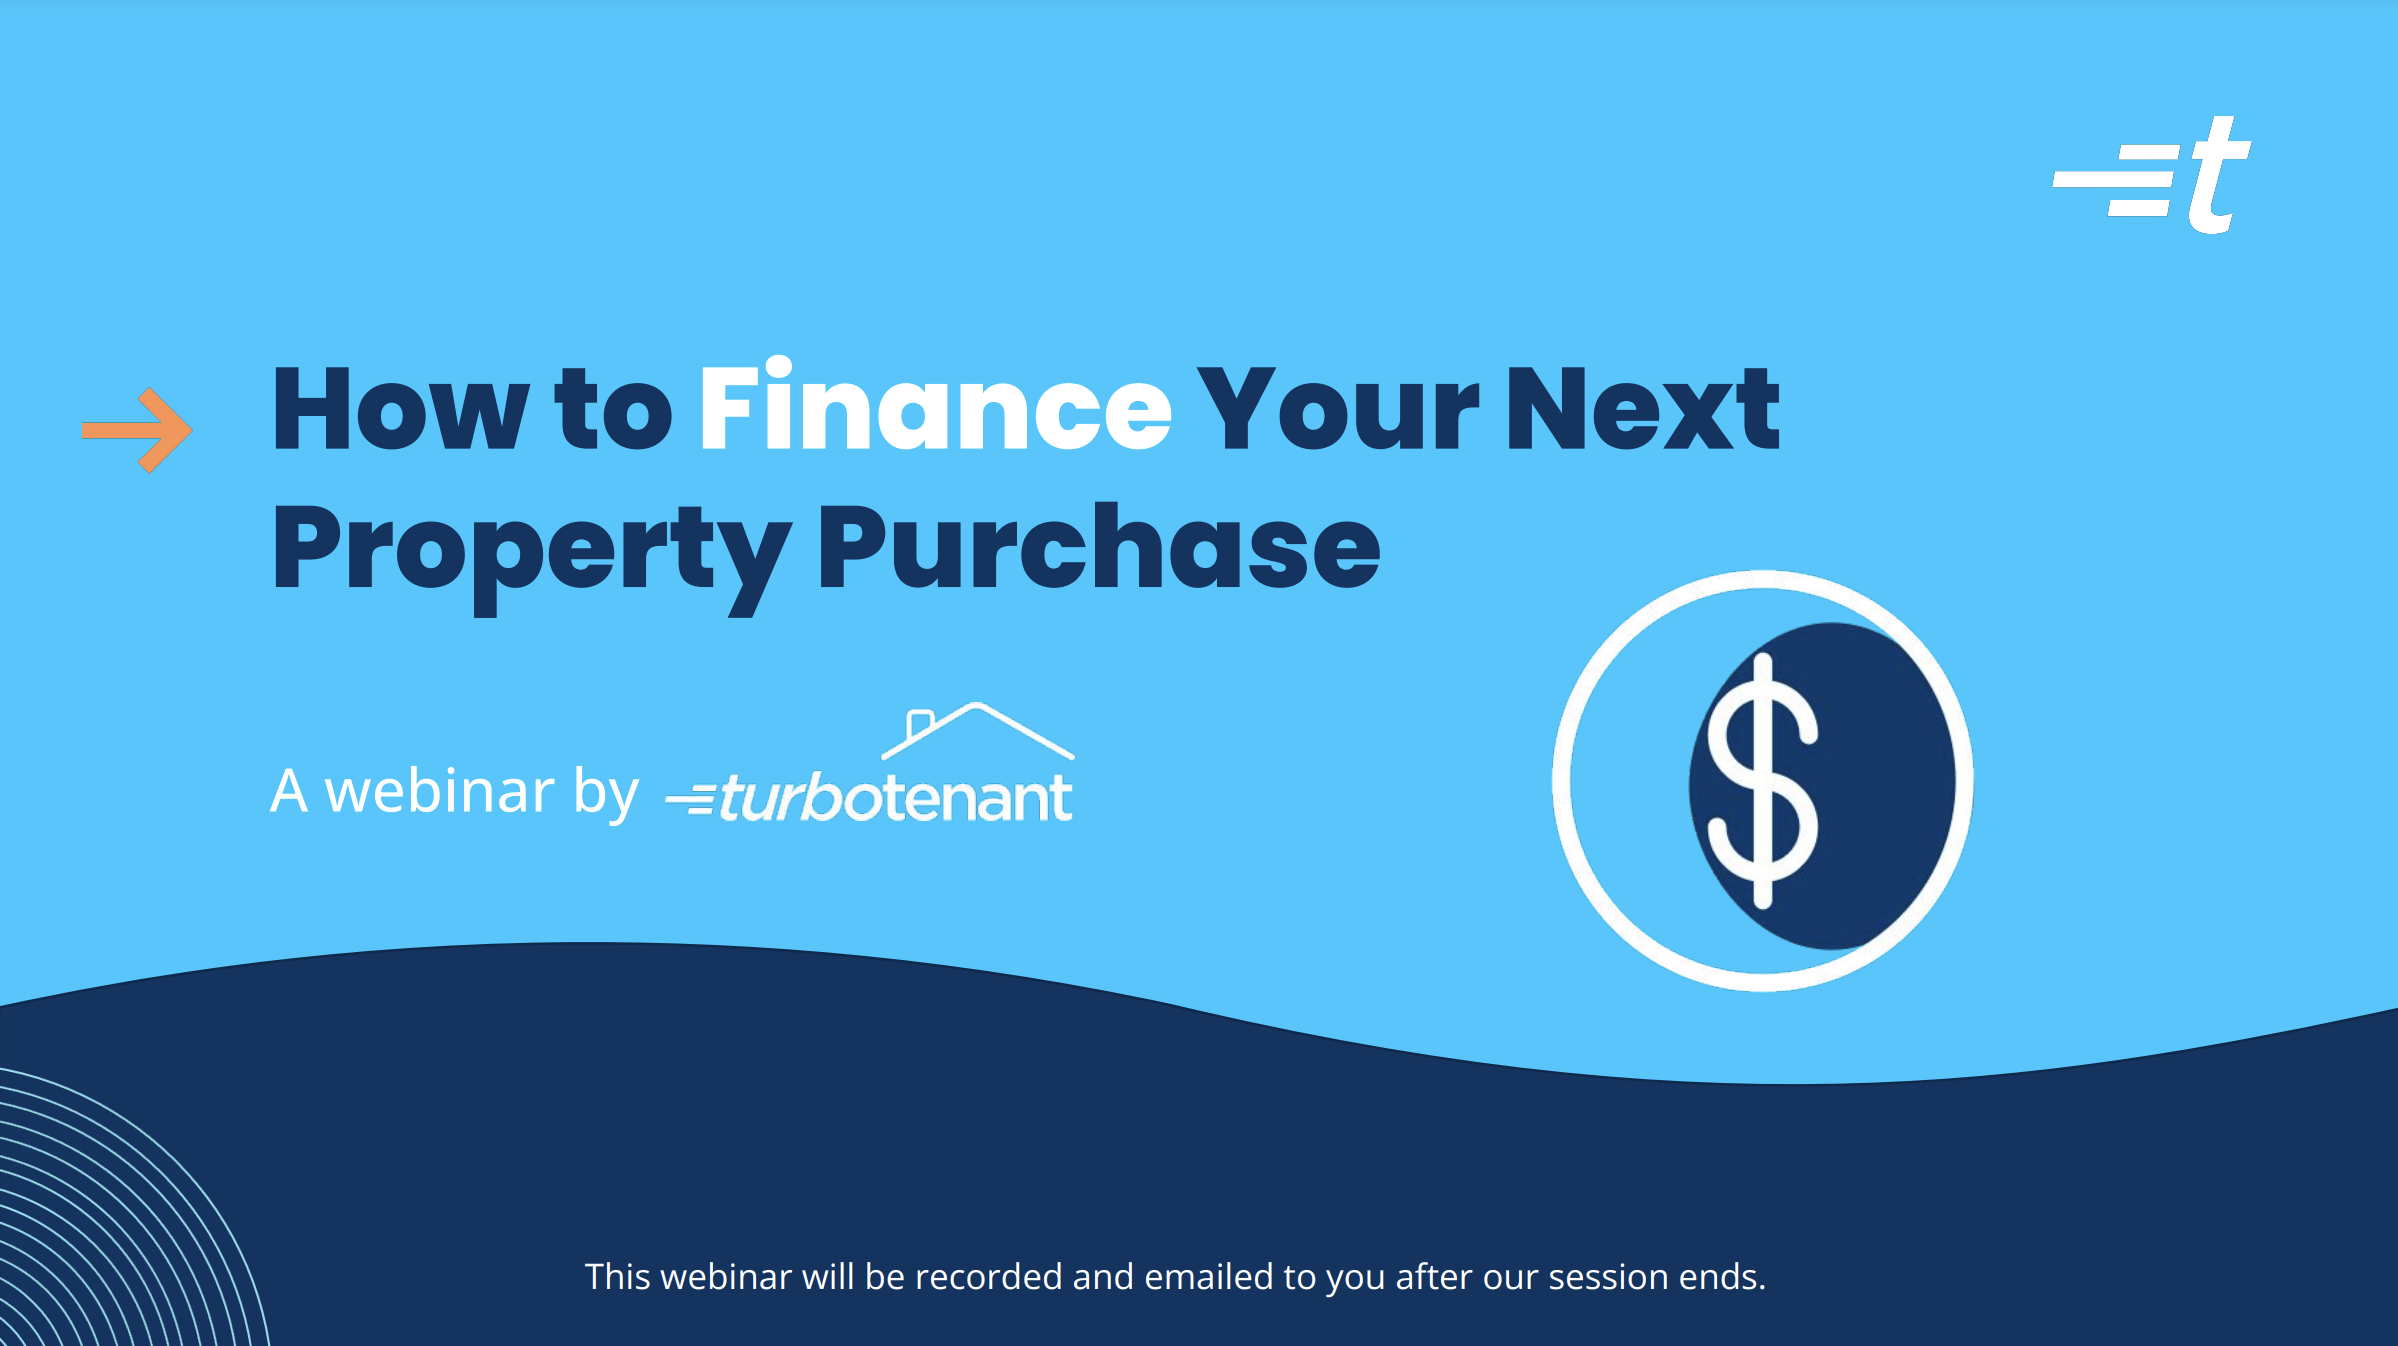 How to Finance Your Next Property Purchase: An Overview